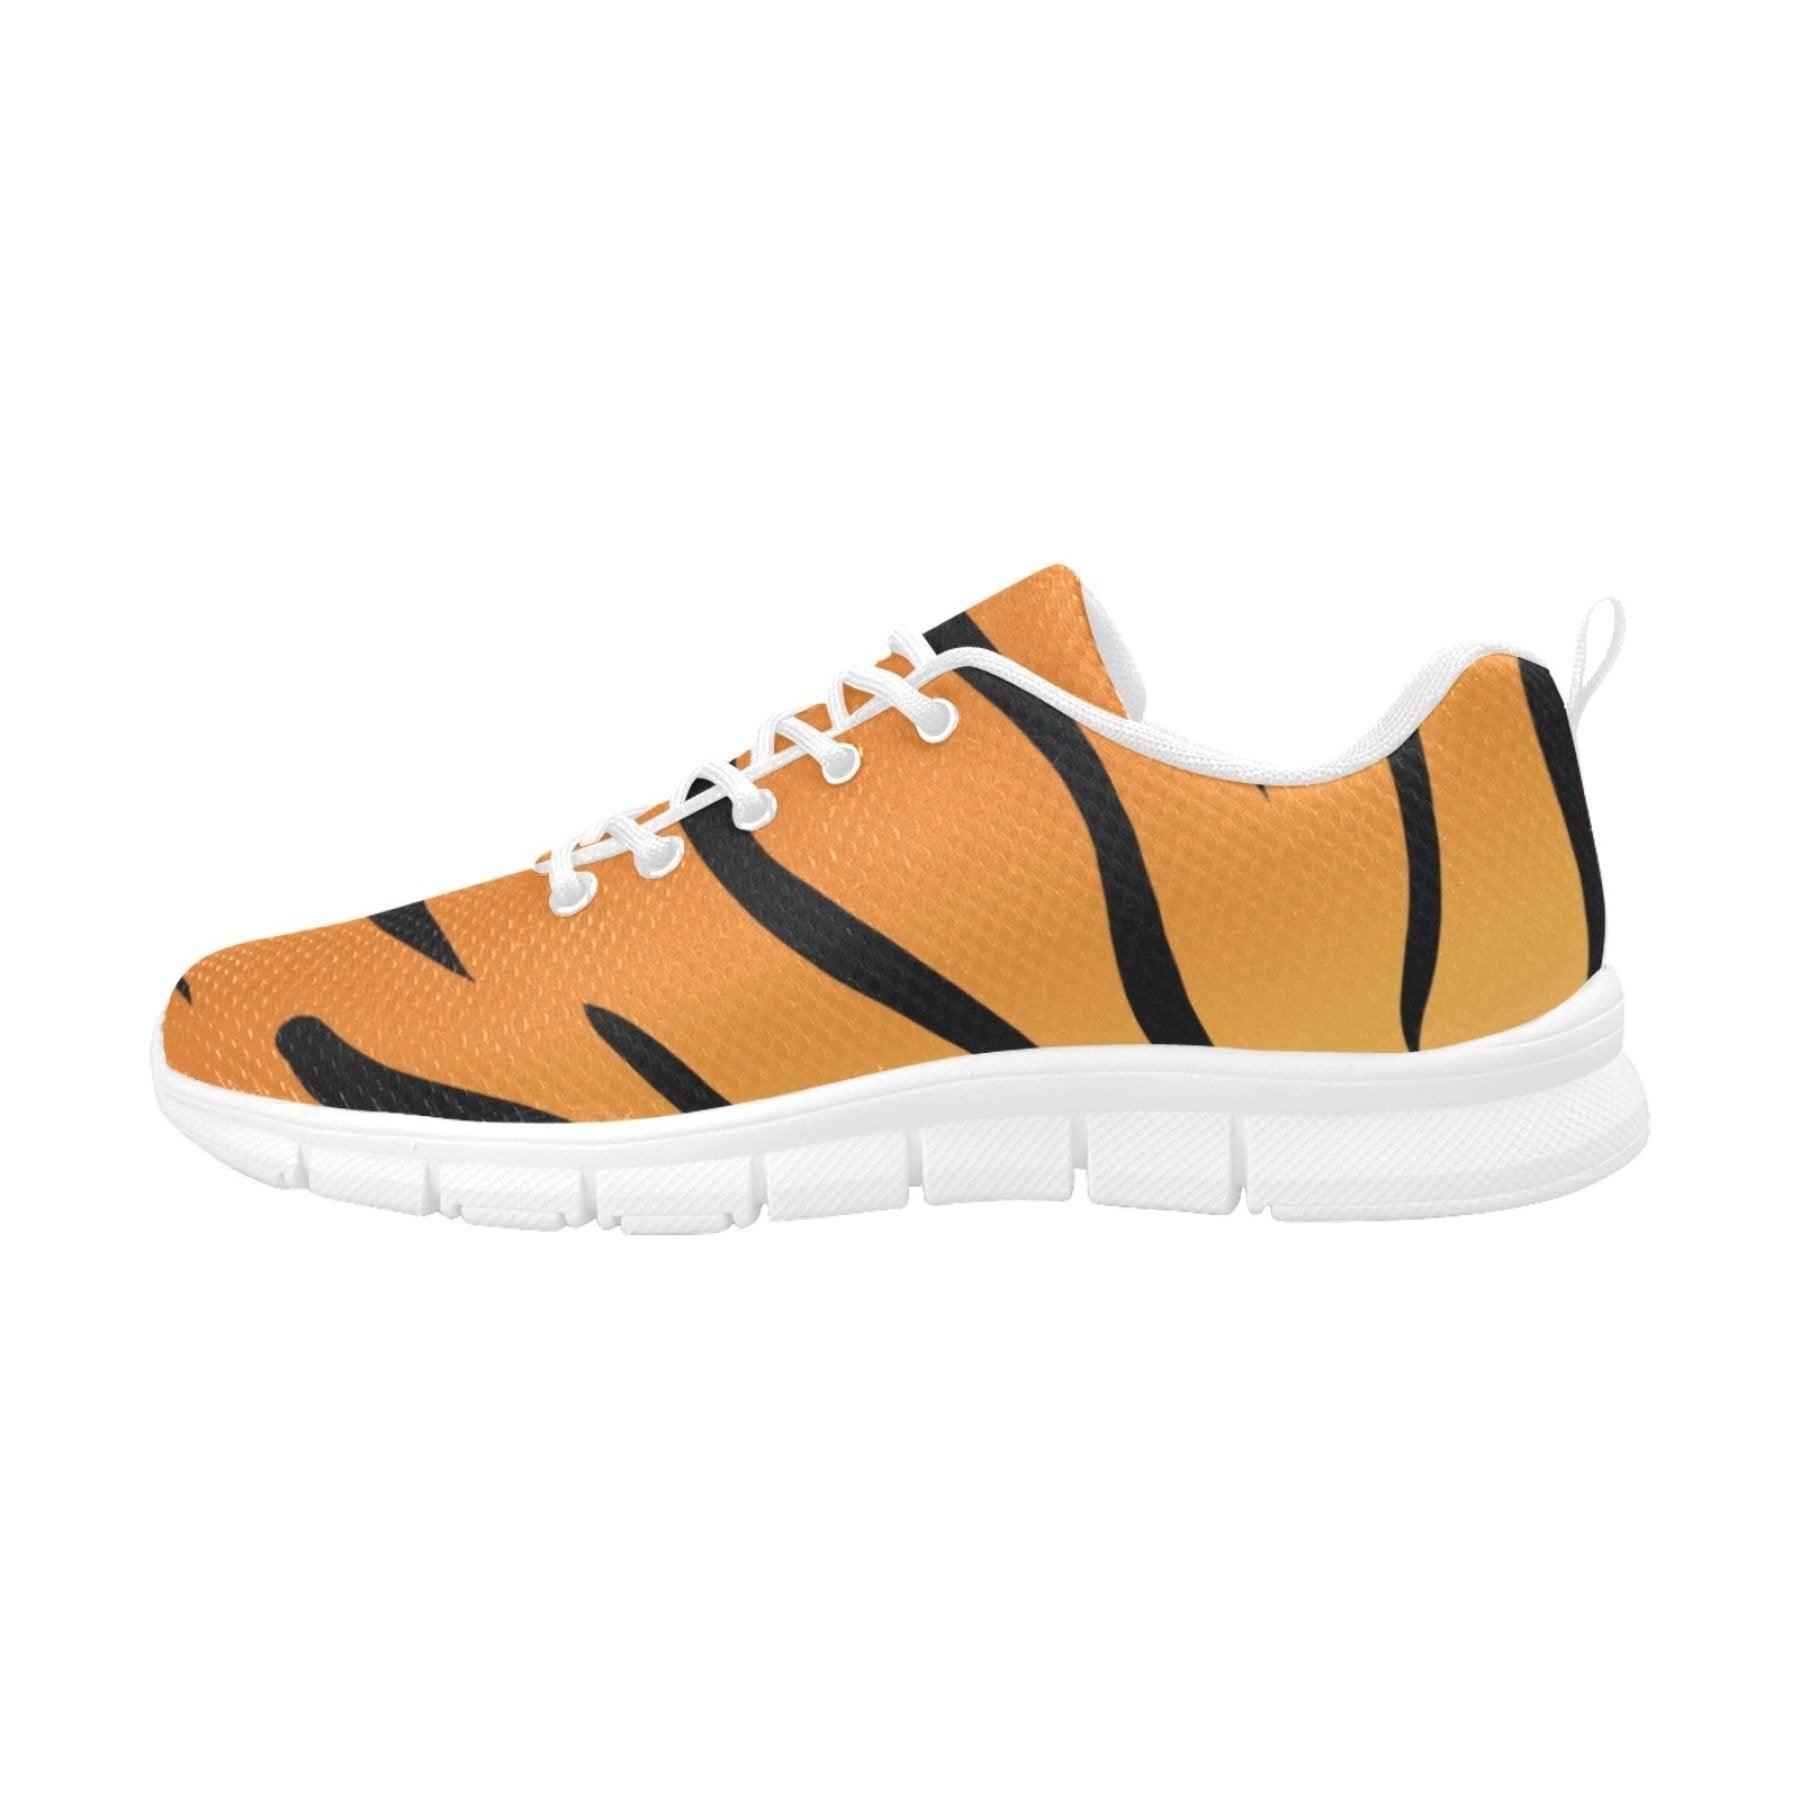 Womens Sneakers, Orange And Black Tiger Striped Running Shoes - VirtuousWares:Global